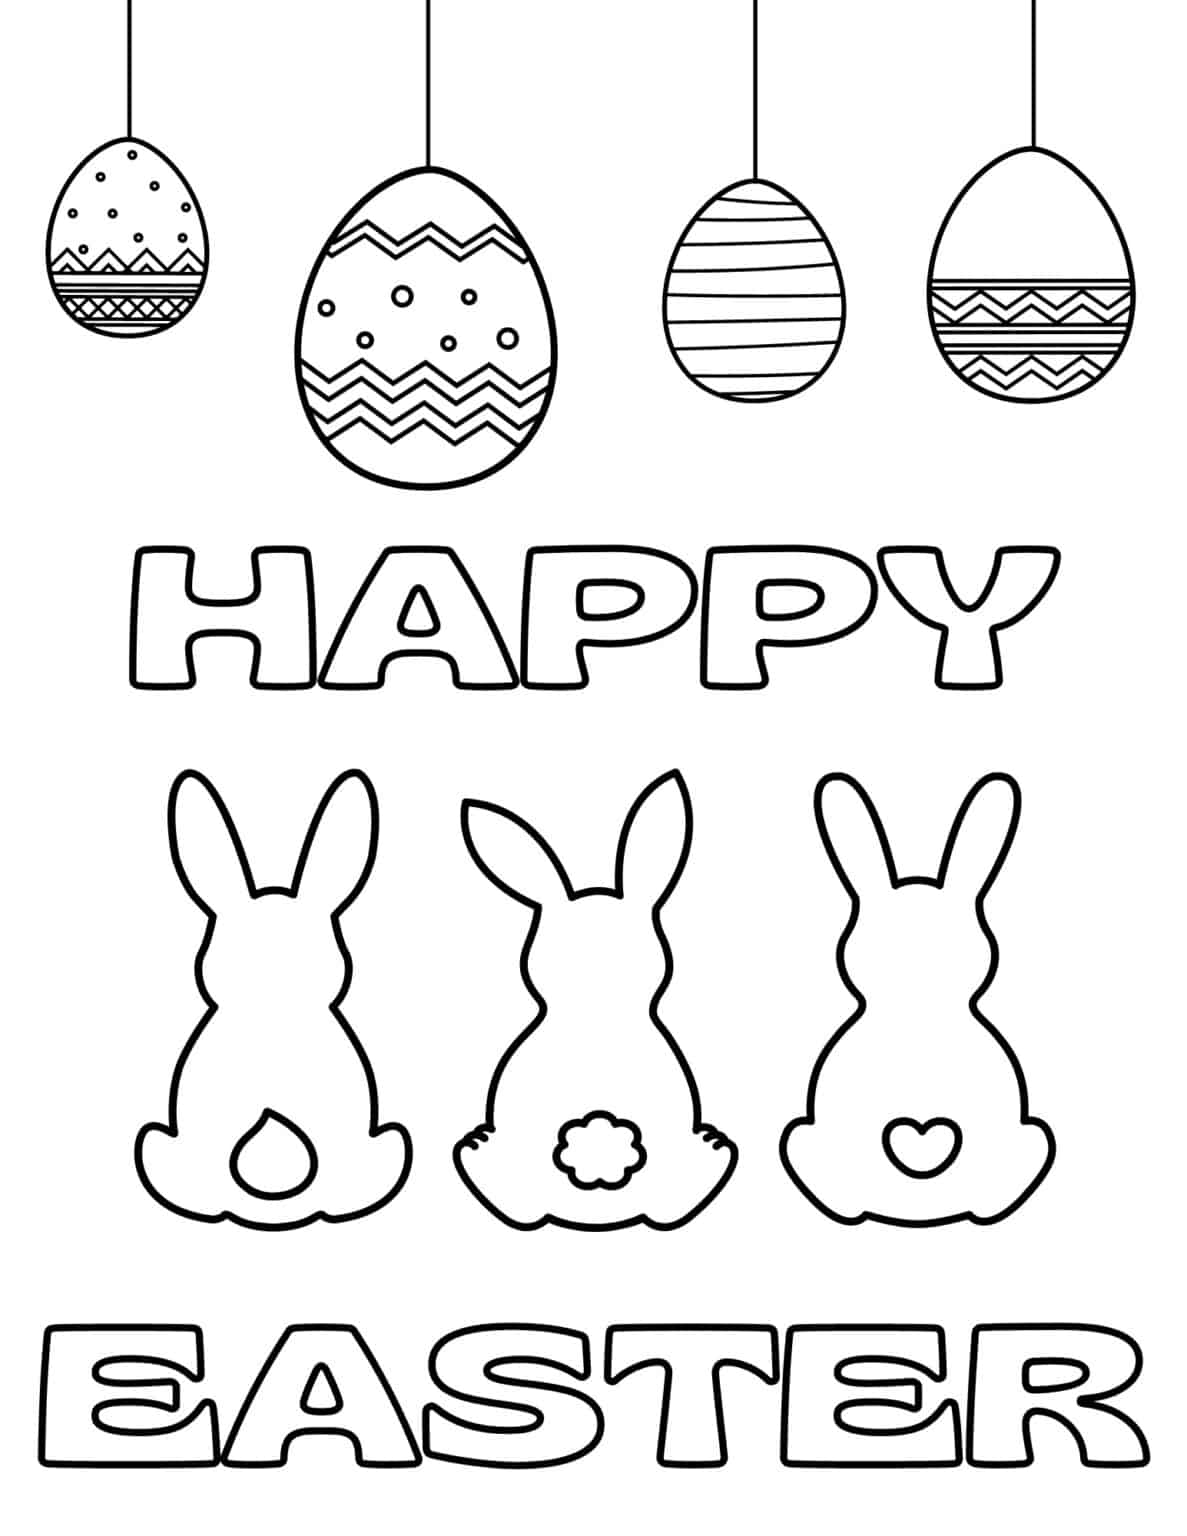 20 Free Printable Easter Coloring Pages for Kids - Prudent Penny Pincher